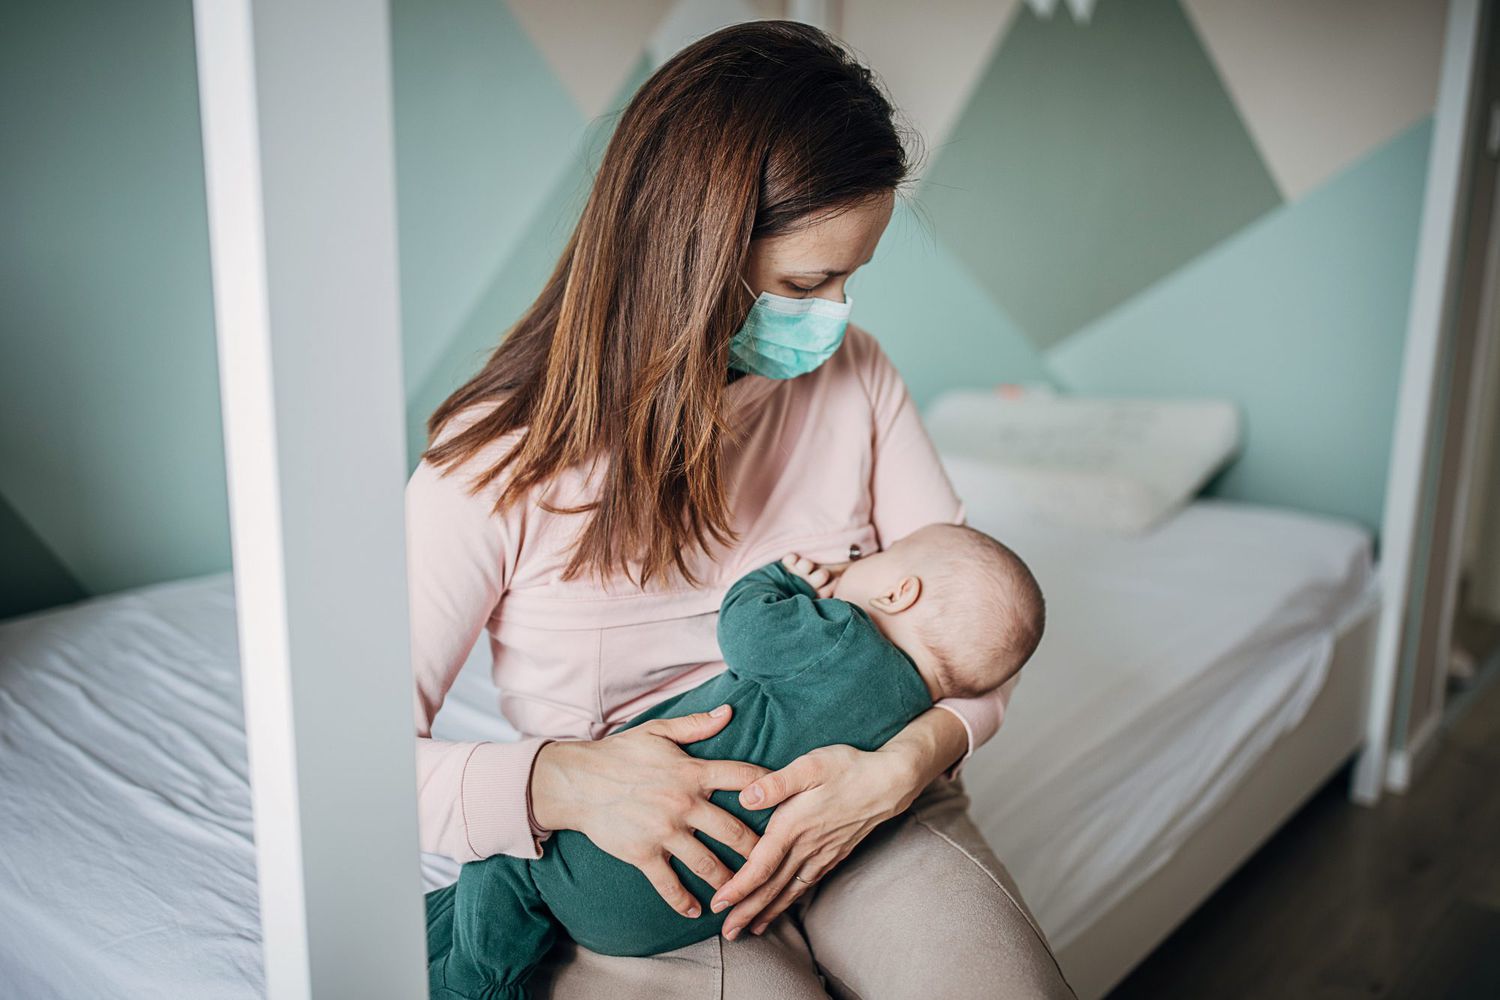 An image of a mother breastfeeding her child in a face mask.